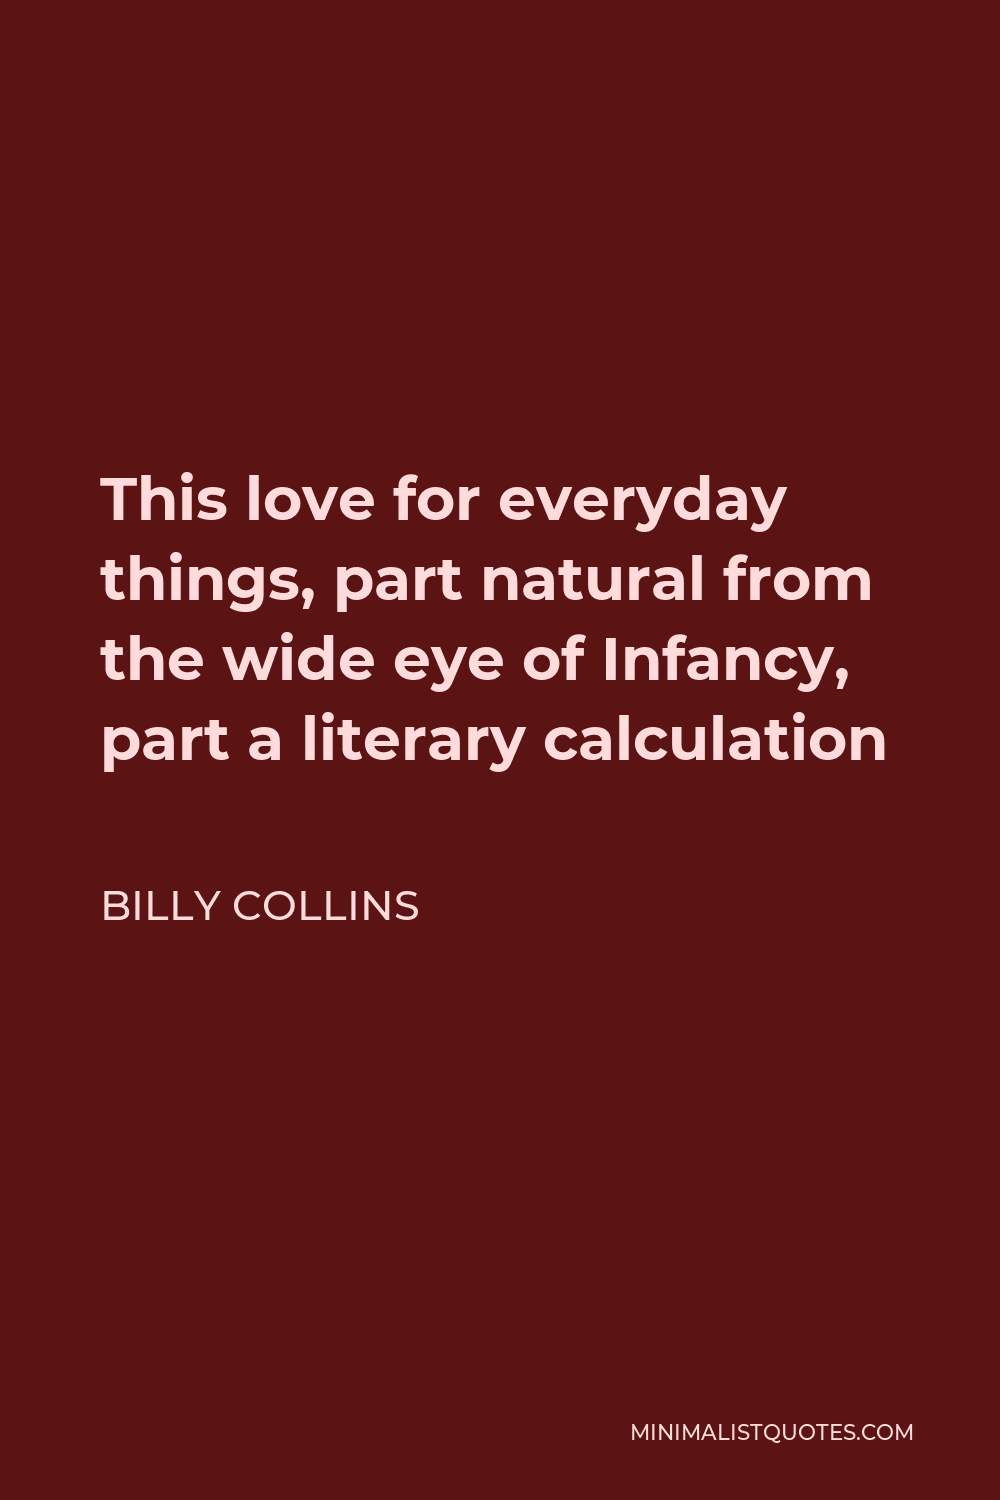 Billy Collins Quote - This love for everyday things, part natural from the wide eye of Infancy, part a literary calculation